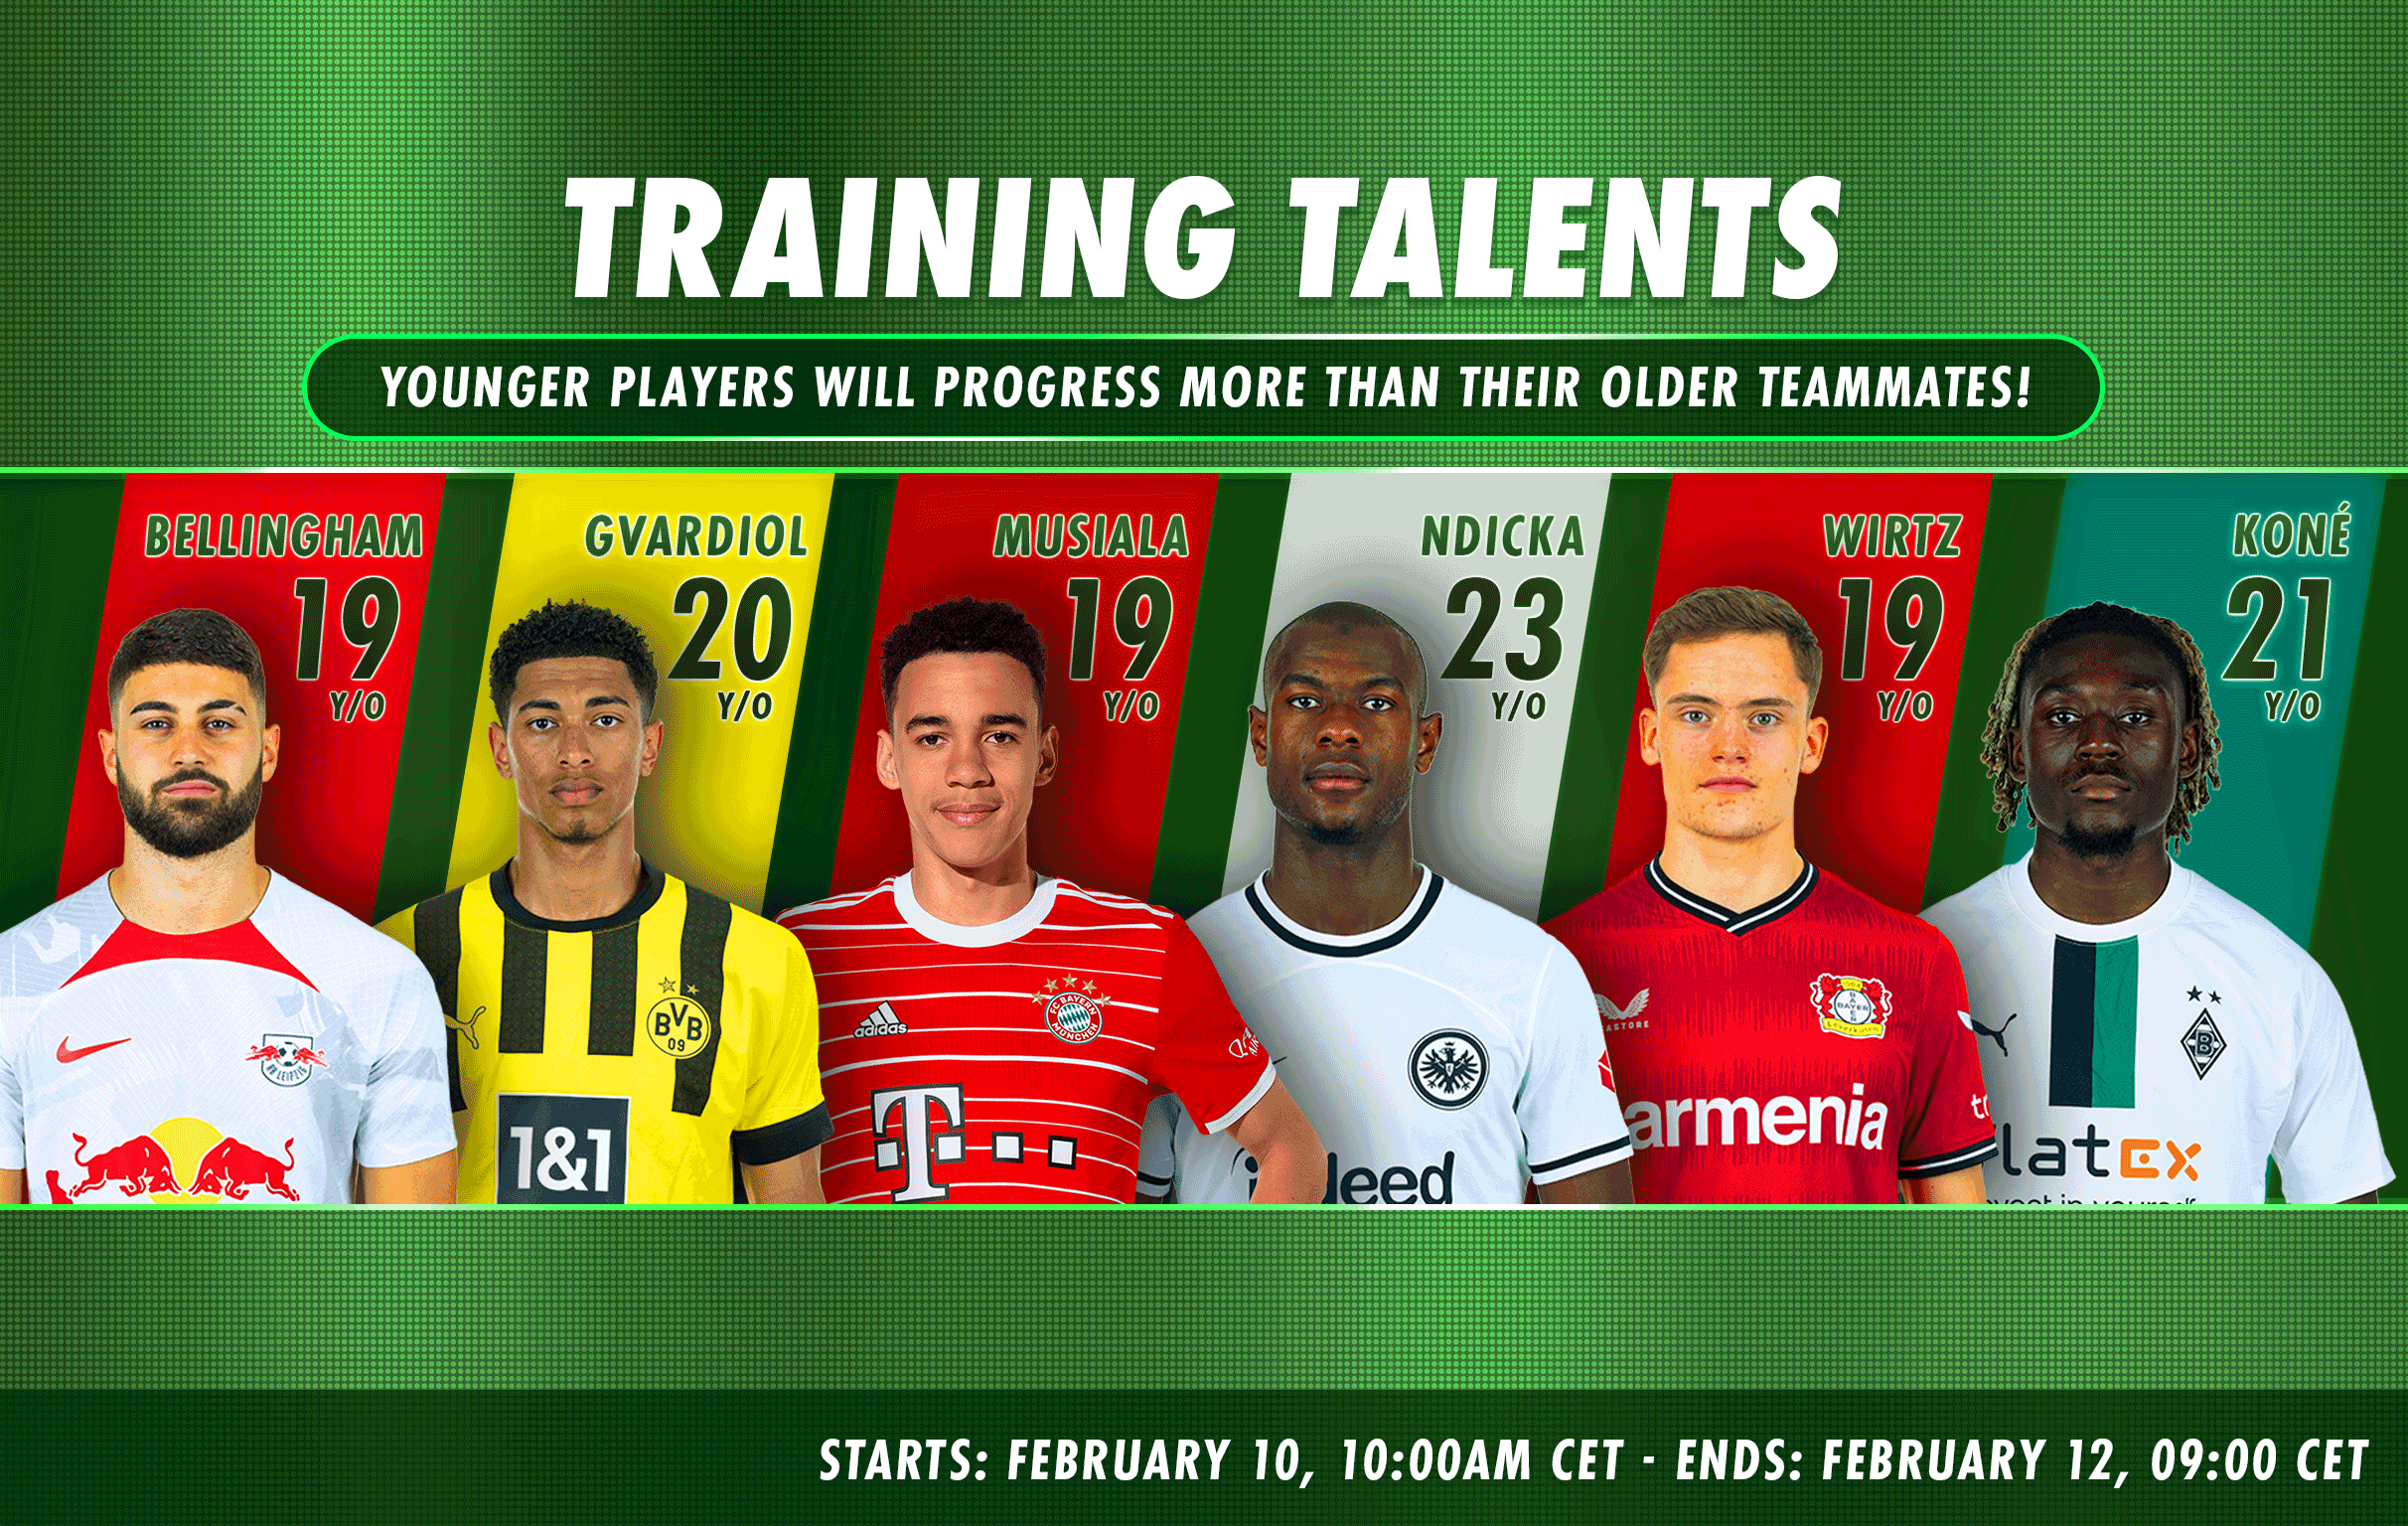 CP_Training-Talents-6-Players_REDDIT.png